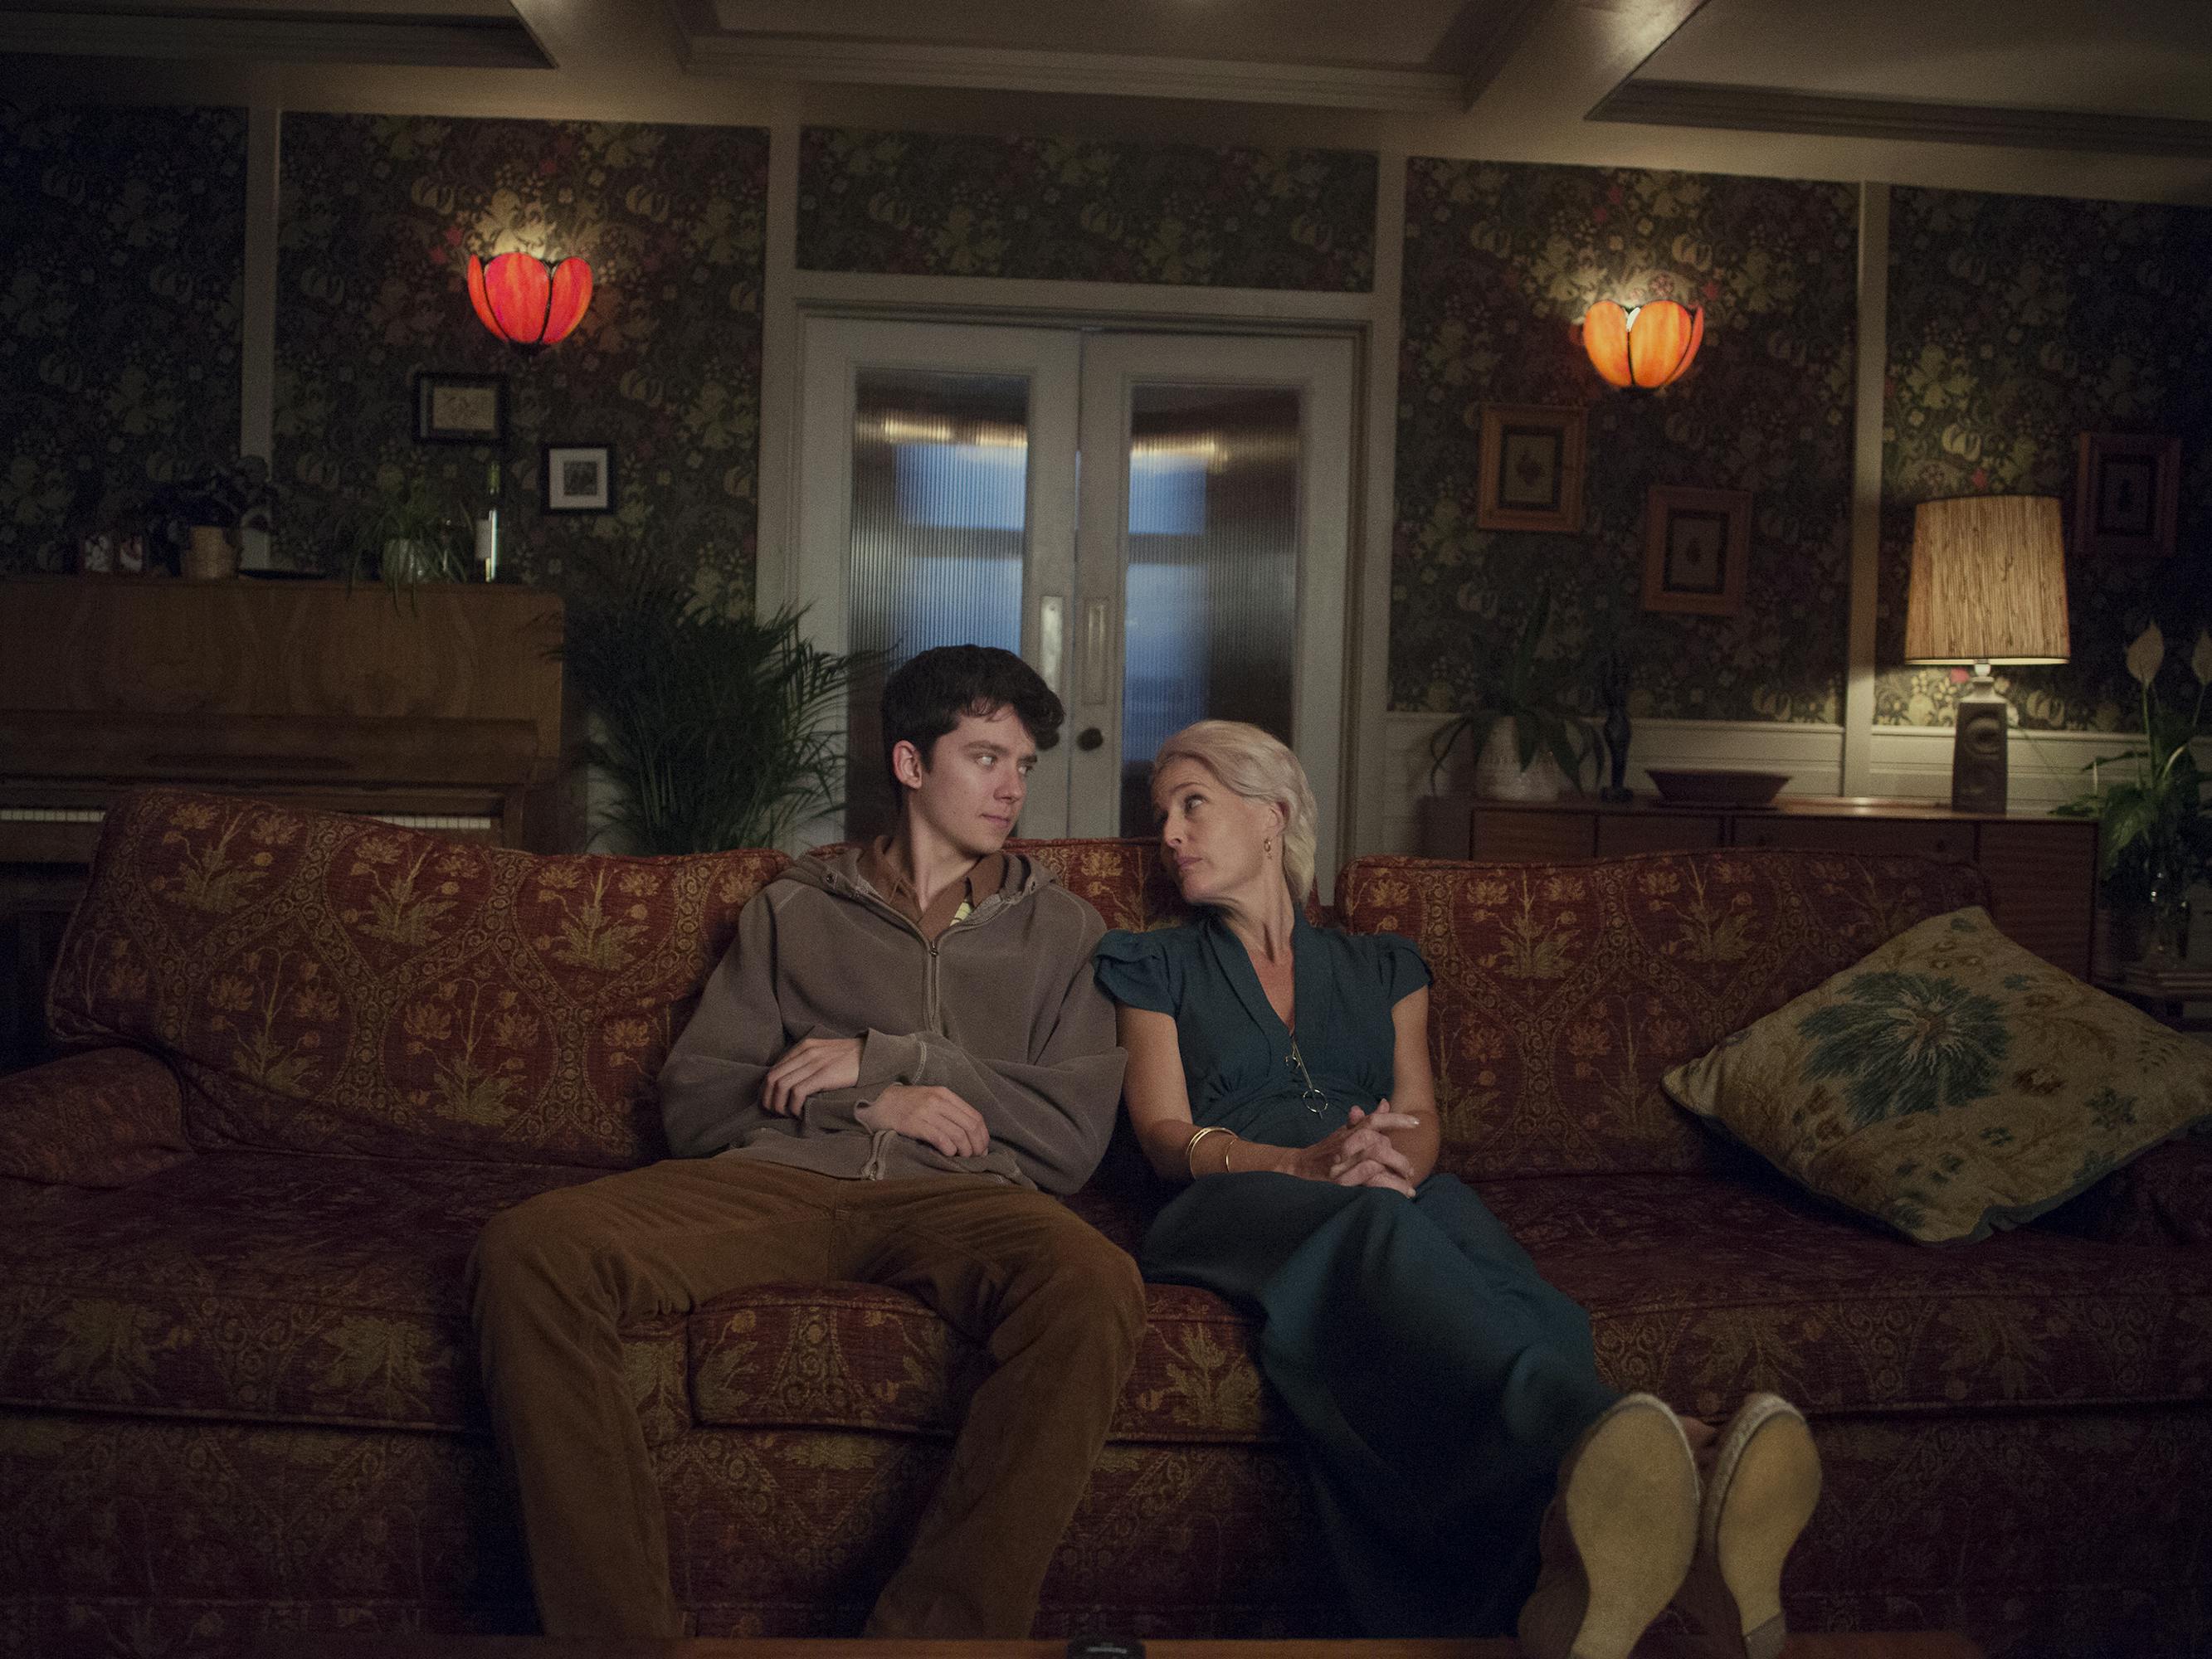 Otis Milburn (Asa Butterfield) and Dr. Jean Milburn (Gillian Anderson) sit side by side on a patterned couch in their dimly lit living room.